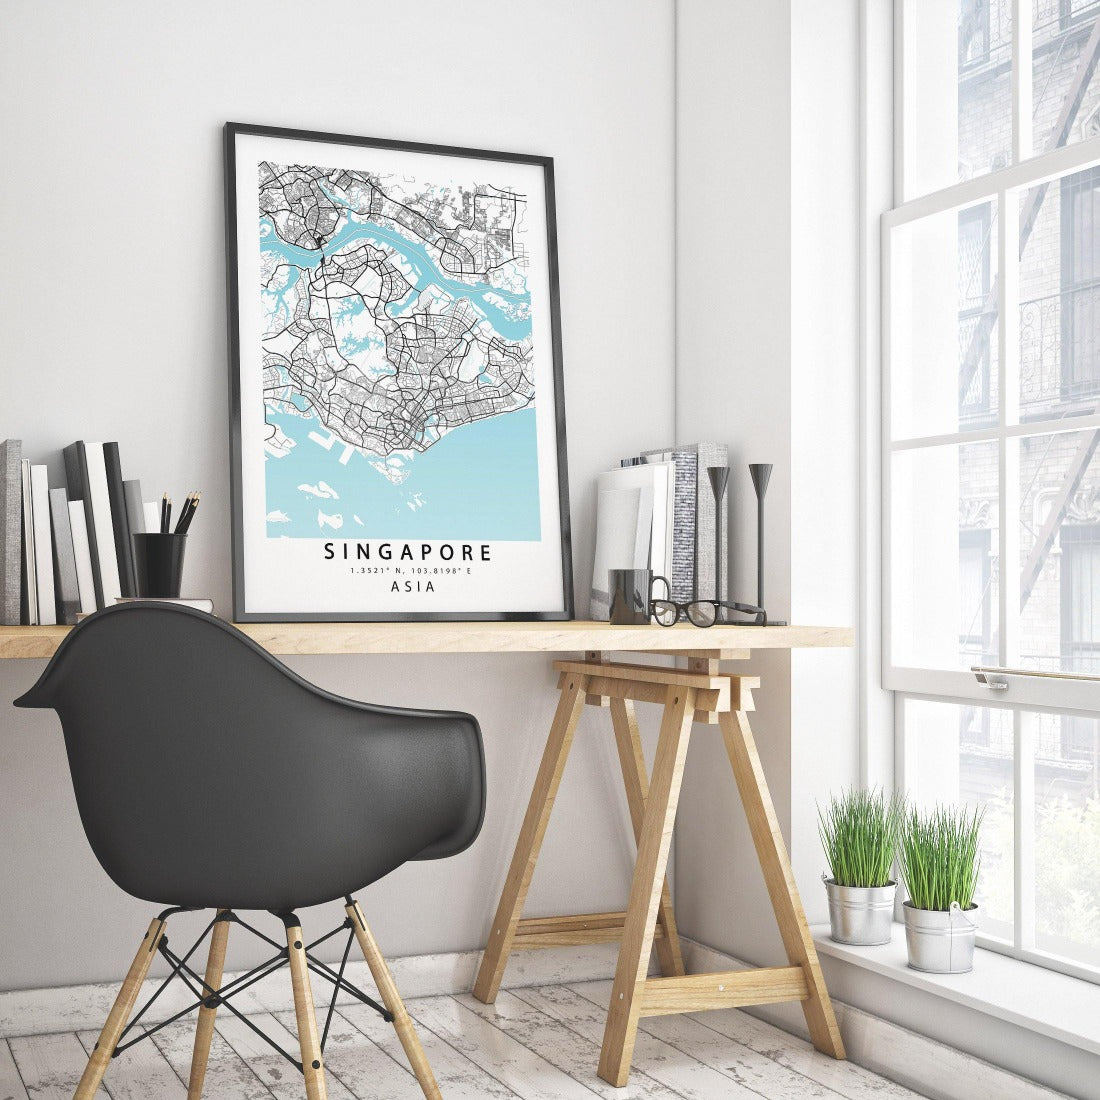 Decorate your walls with a little bit of Singapore.Showcase your wanderlust with this unique, Singapore City map print. Drawn by hand and printed on high quality paper, this print is perfect for anyone who loves exploring new places.Measuring in at 18x24 inches, this print is perfect for framing and adding a pop of color to any room.